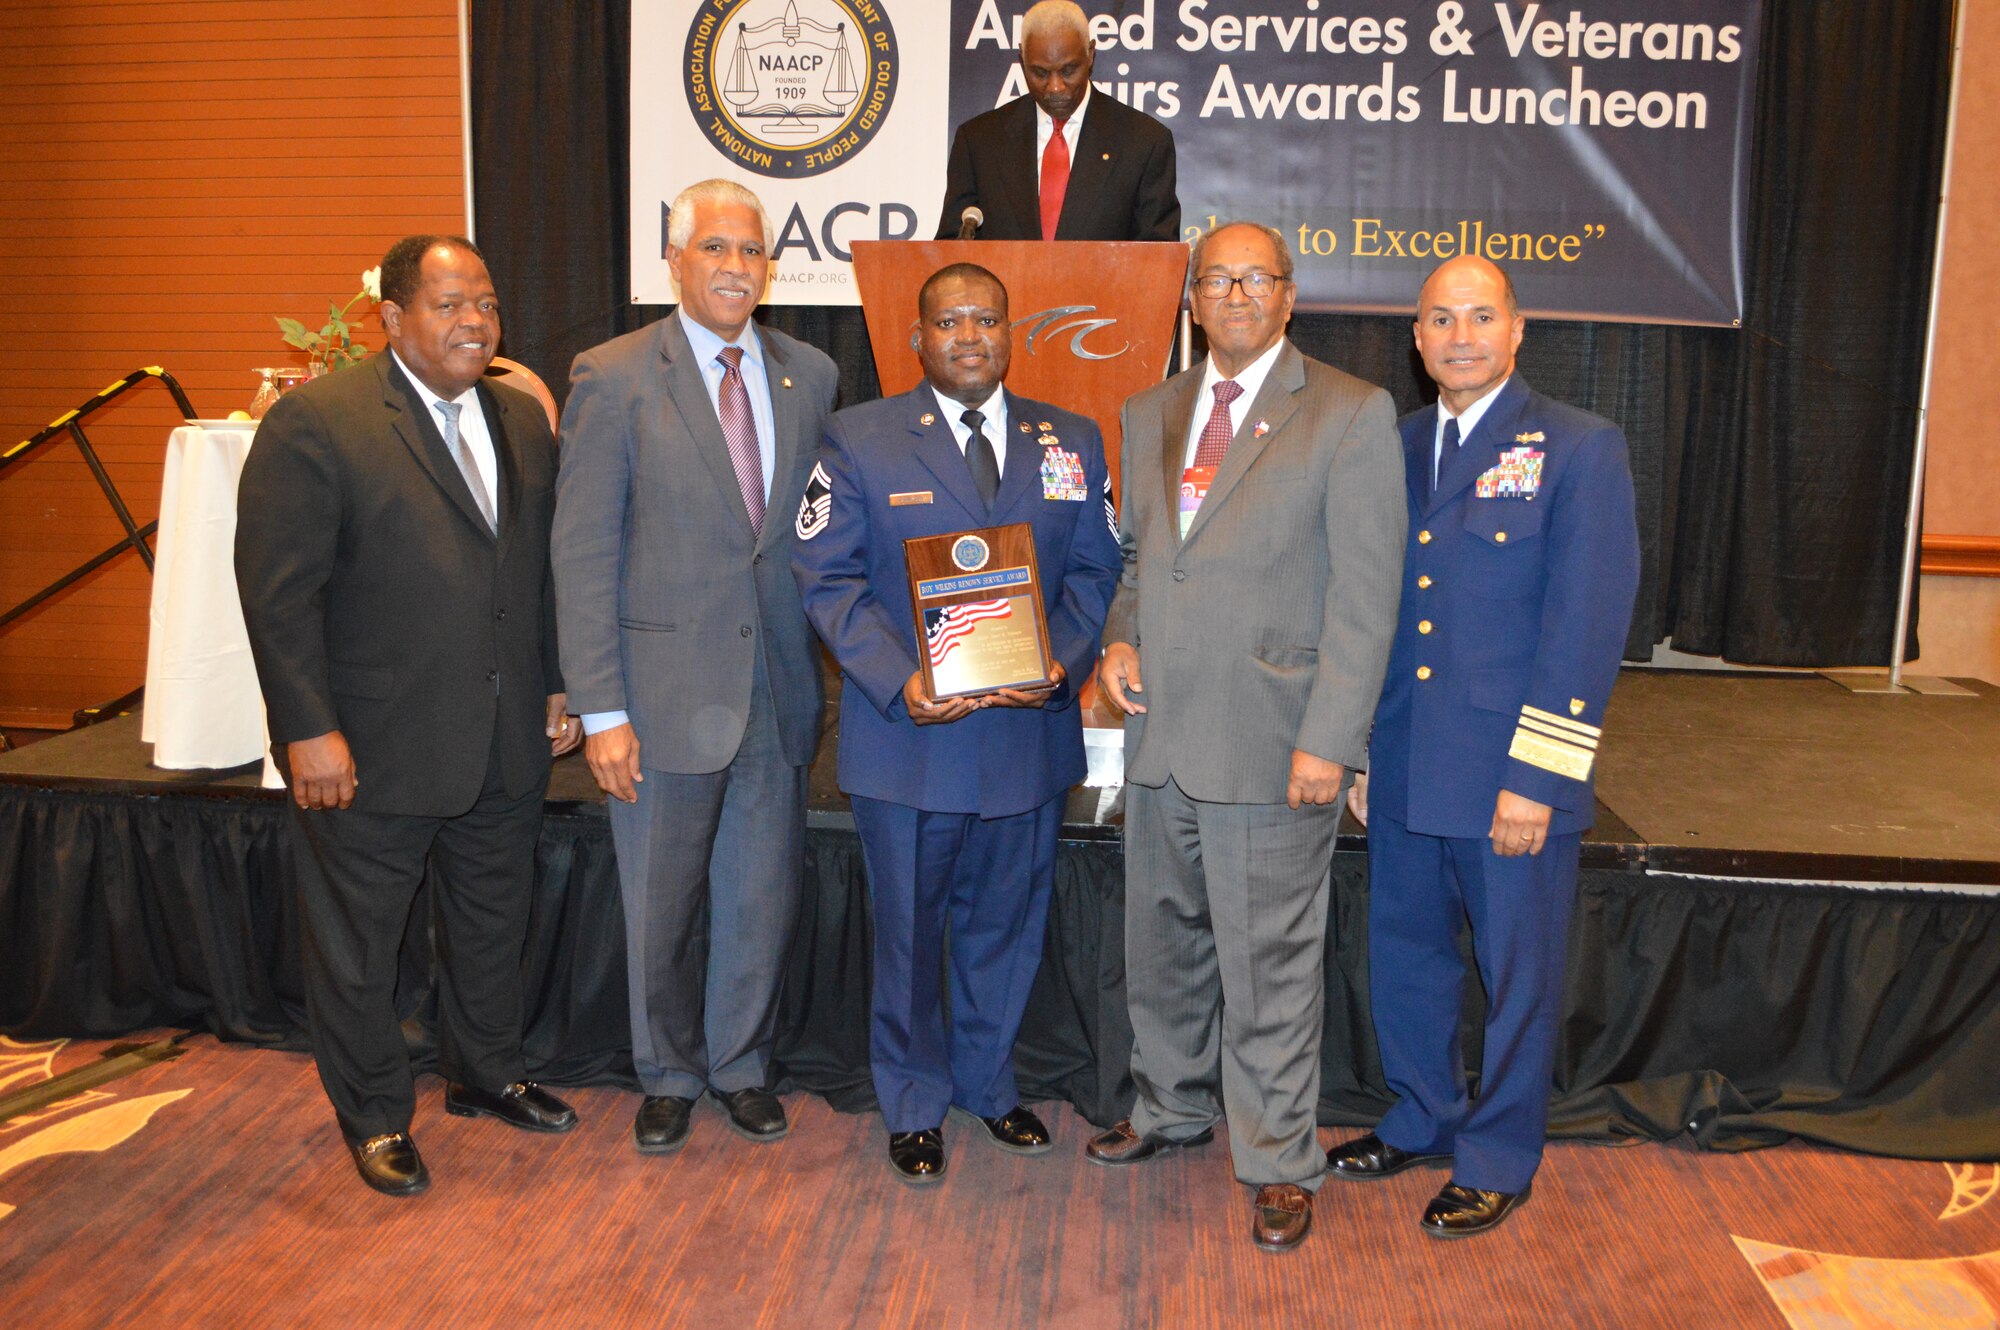 Senior Master Sgt. Torry Thompson of the Nevada Air National Guard receives the Roy Wilkins Renowned Service Award at the 2014 National Association for the Advancement of Colored People (NAACP) 39th Annual Armed Services and Veterans Affairs Awards Luncheon, Las Vegas Nevada July 22, 2014.